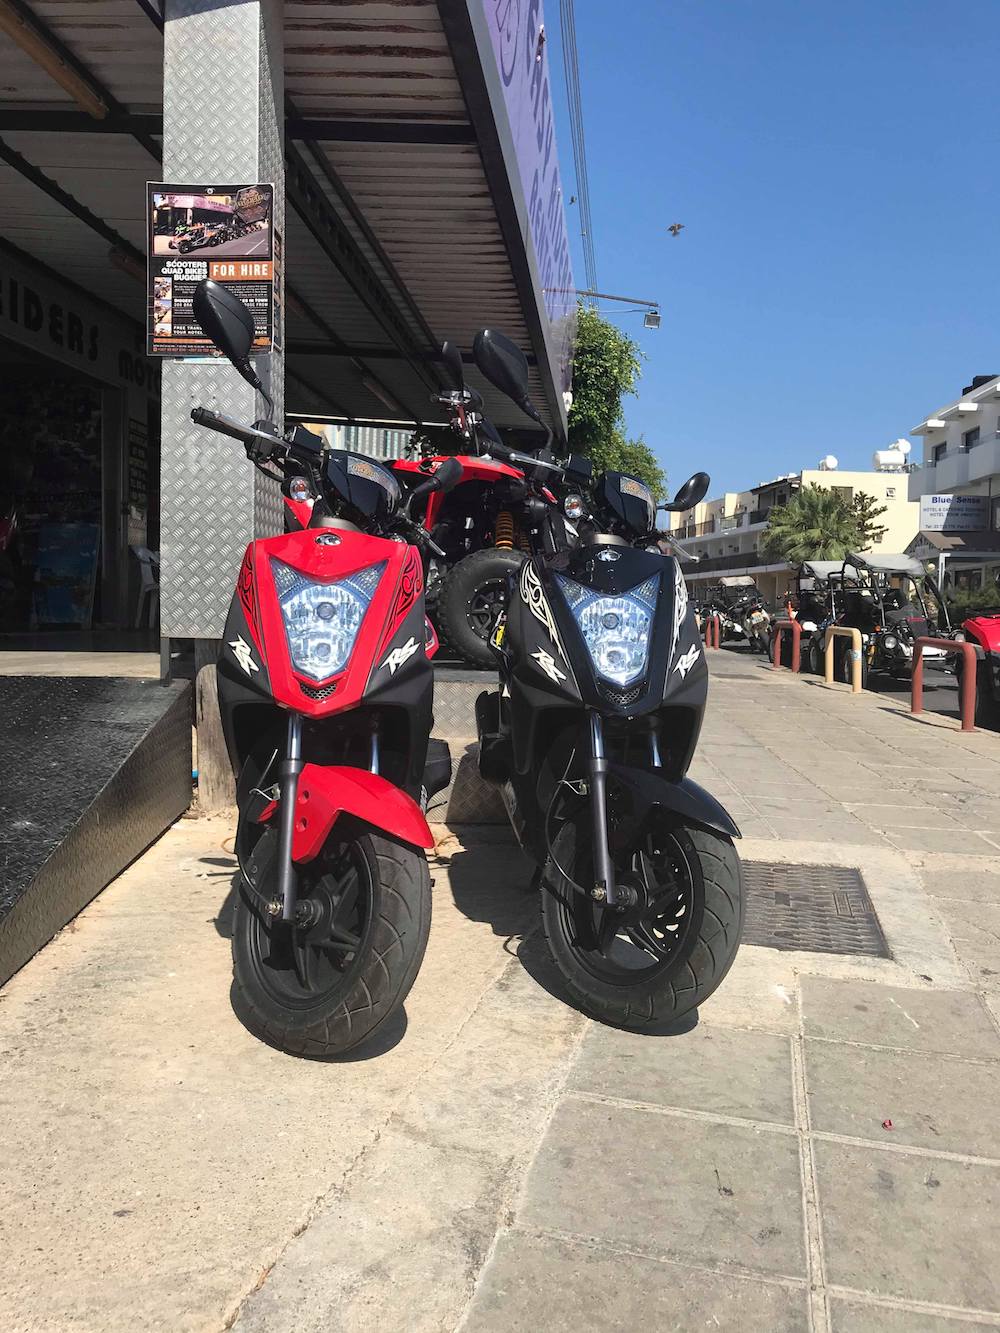 Kymco Agility 80cc For Rent in Ayia Napa